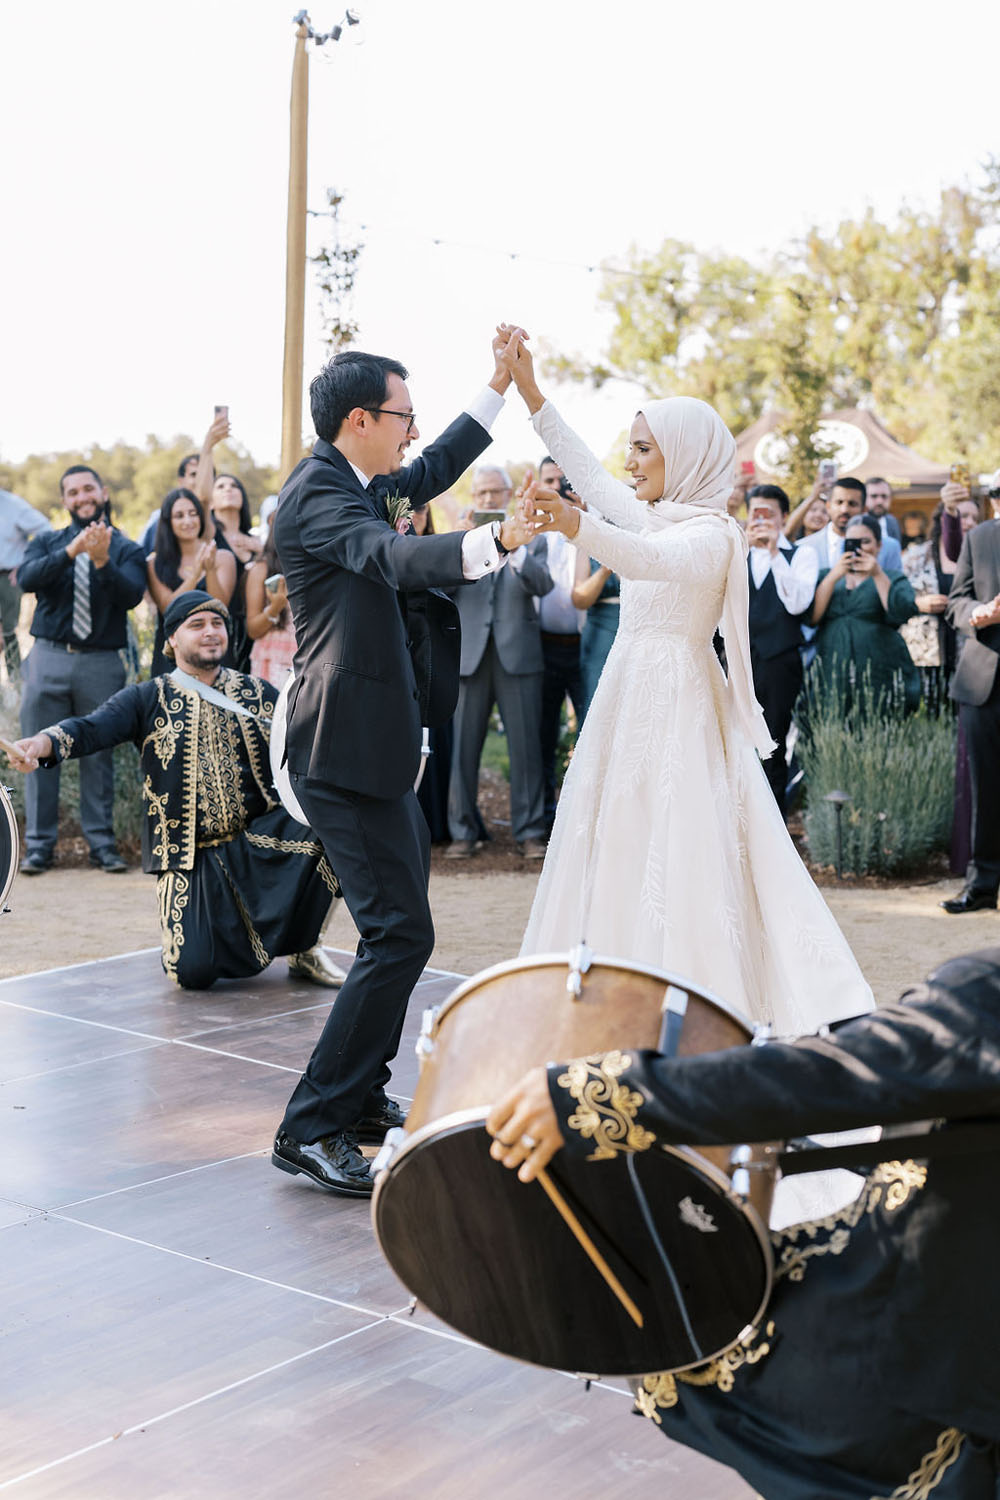 Chic summer wedding with a nod to Palestinian culture